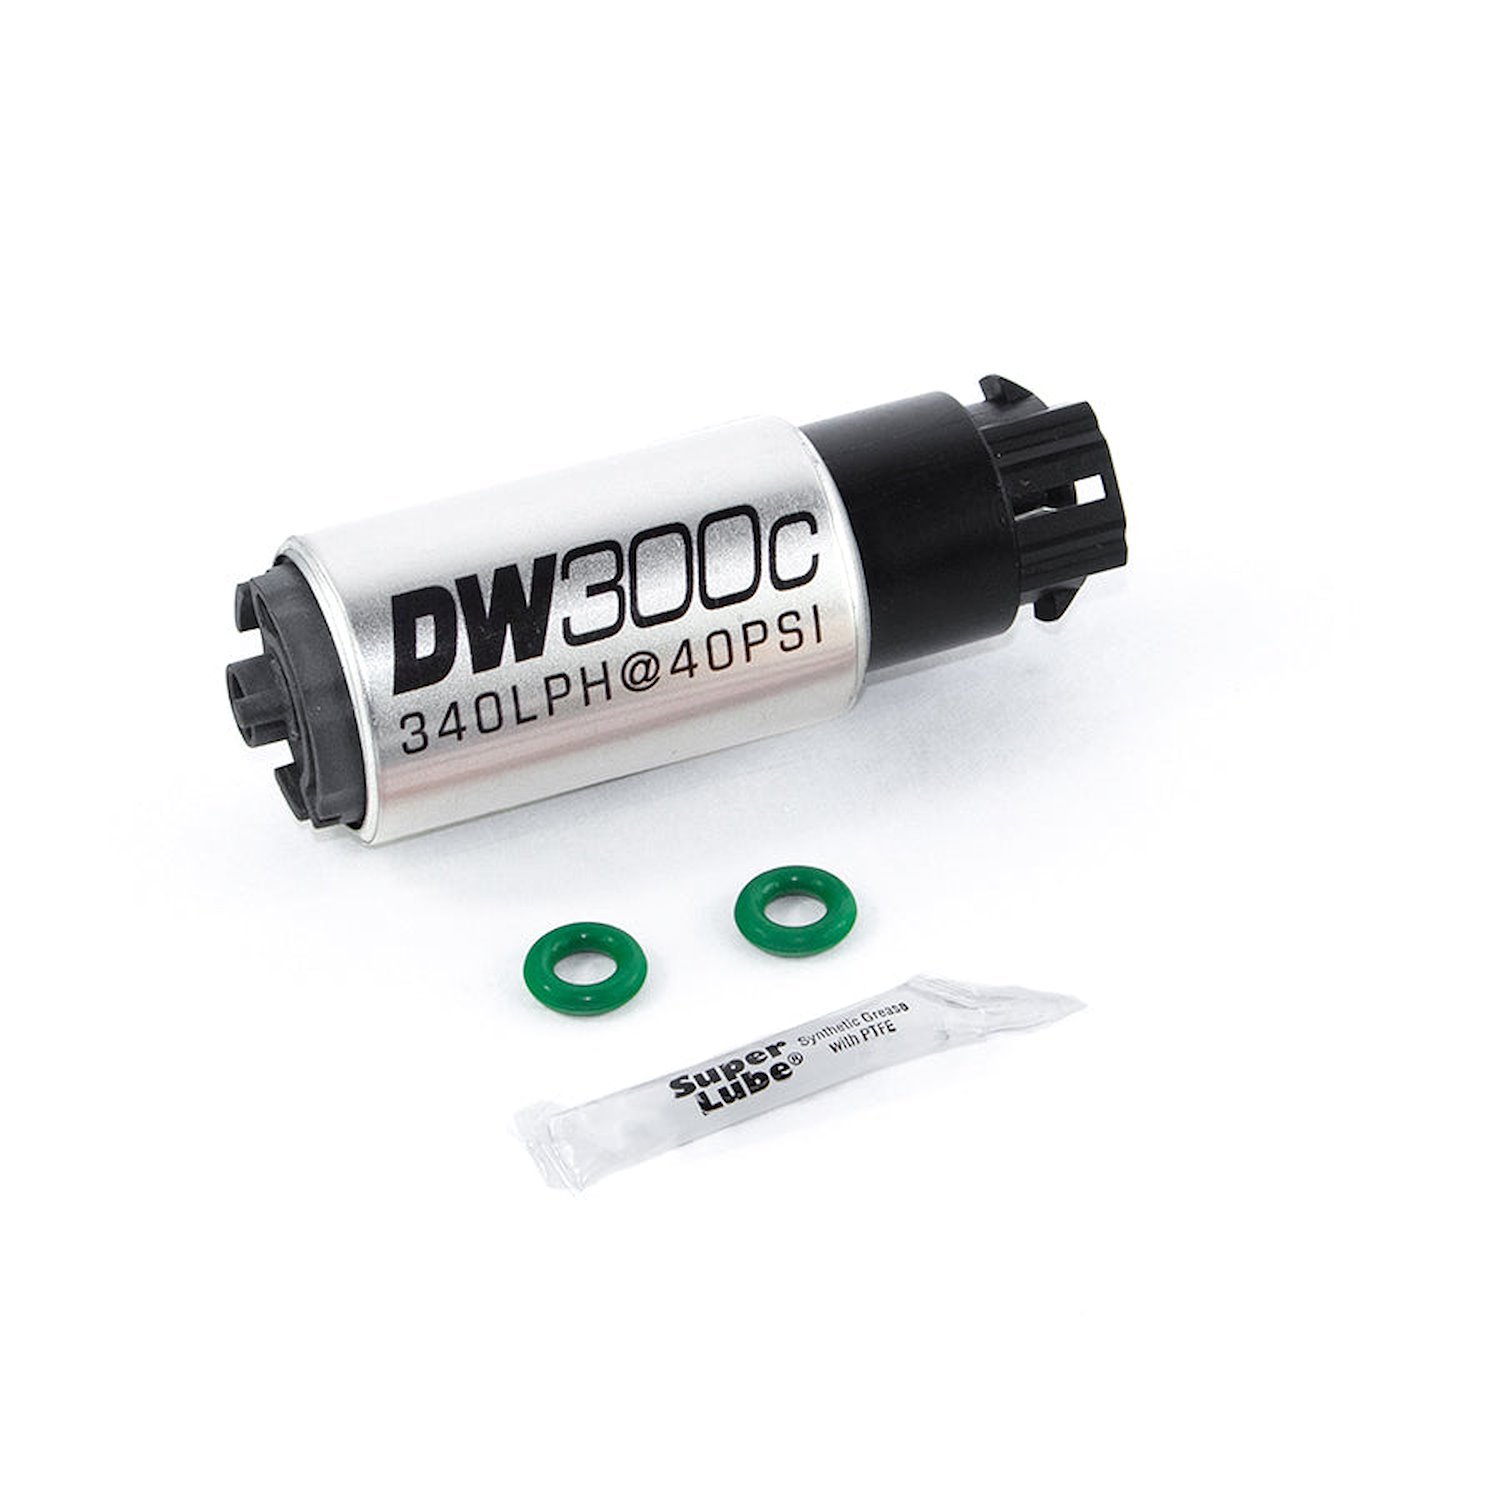 93091009 DW300C series 340lph compact fuel pump w/ mounting clips w /Install Kit for R35 GTR 2009-2021. *Two req